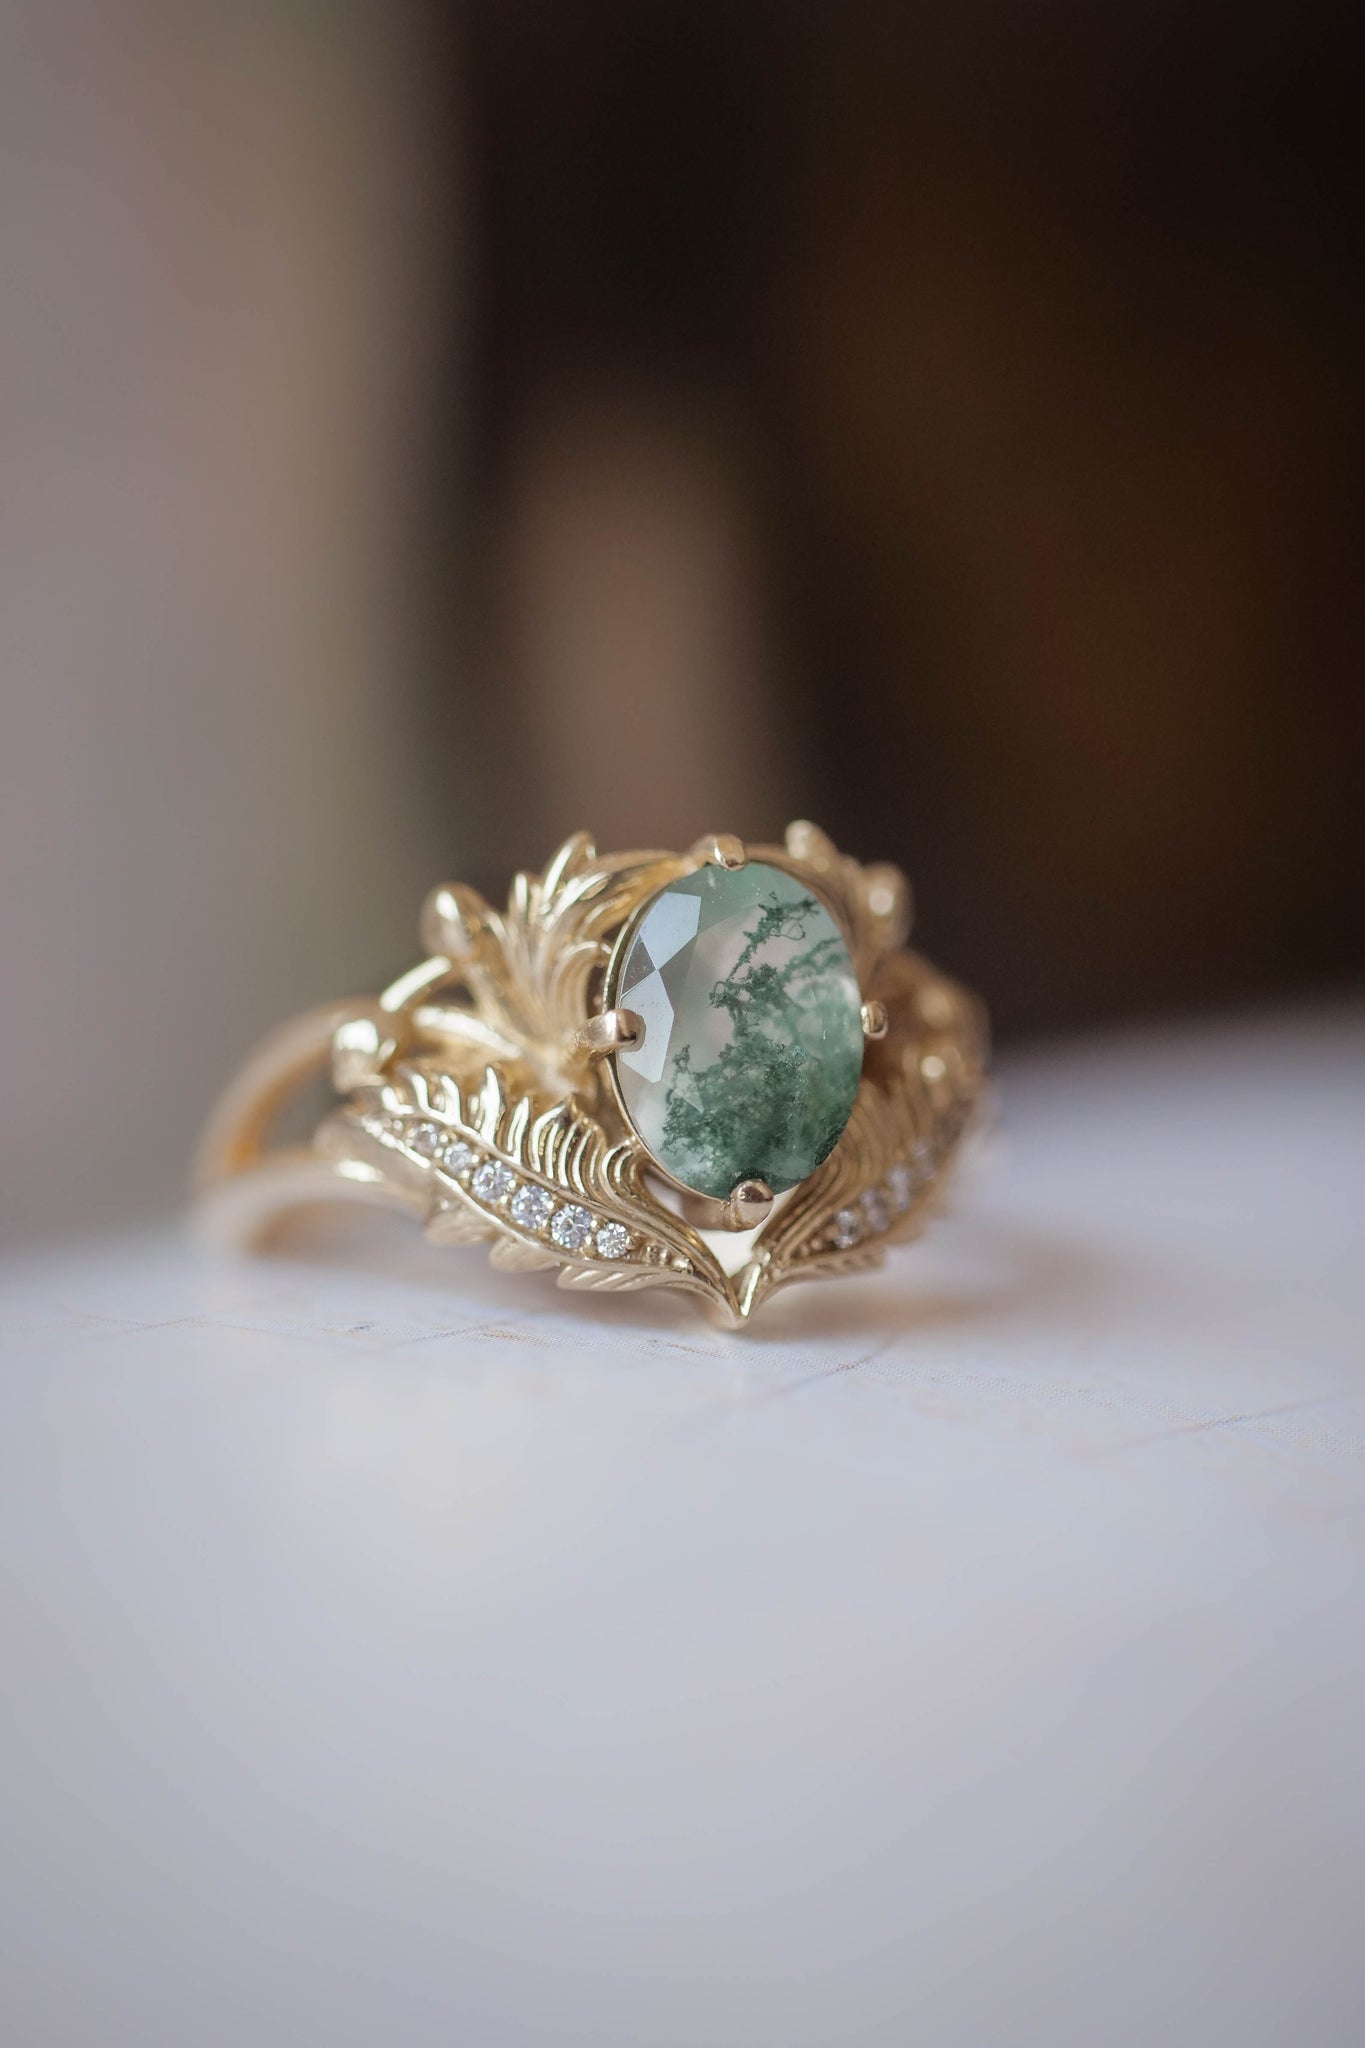 Moss agate and diamonds engagement ring / Adonis - Eden Garden Jewelry™